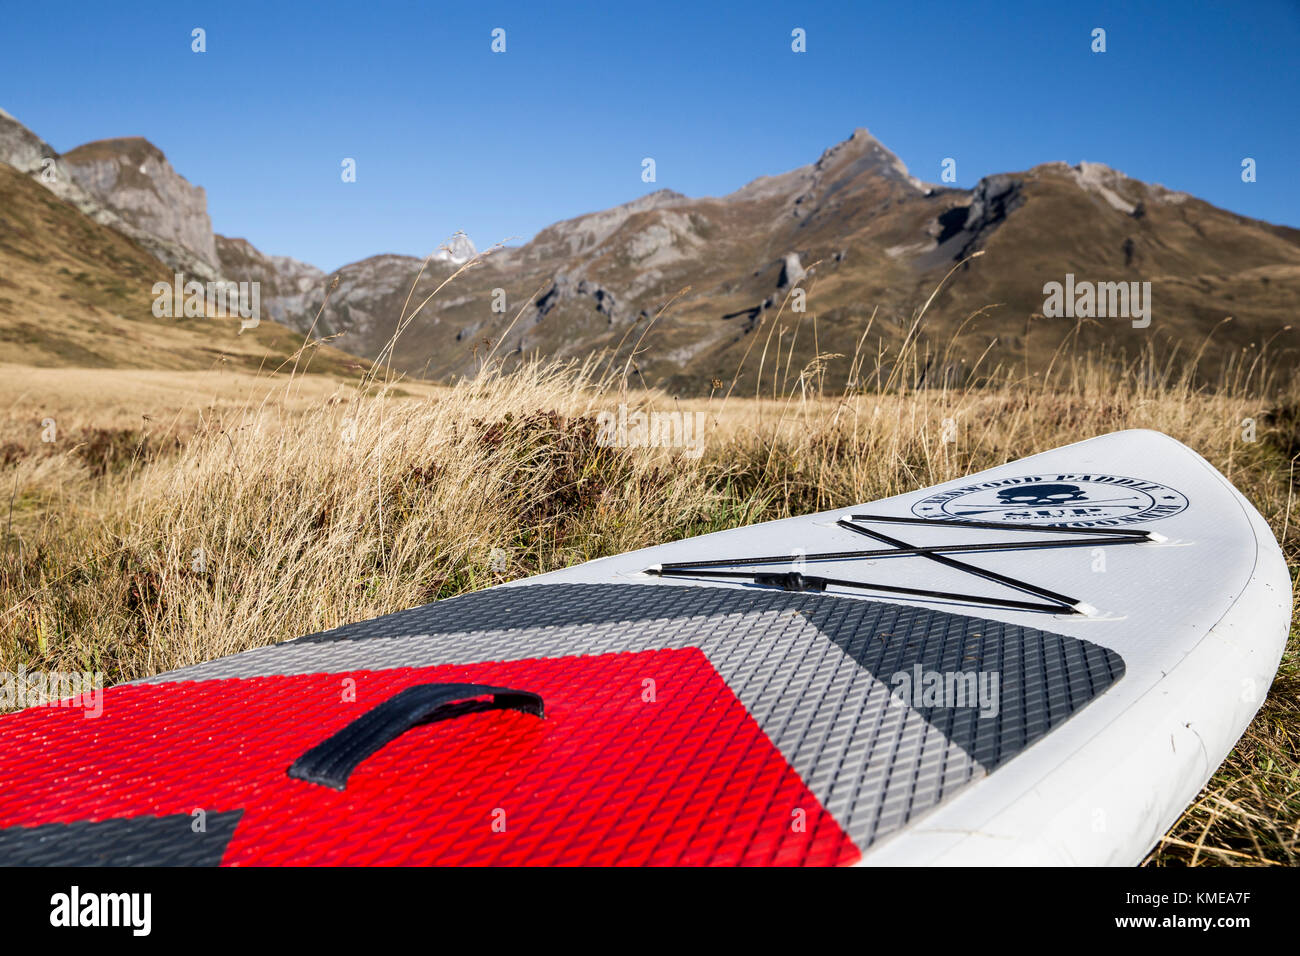 Stand up paddle board lying in meadow and mountains of Italian Alps in background,Little St Bernard Pass,Savoie,France Stock Photo